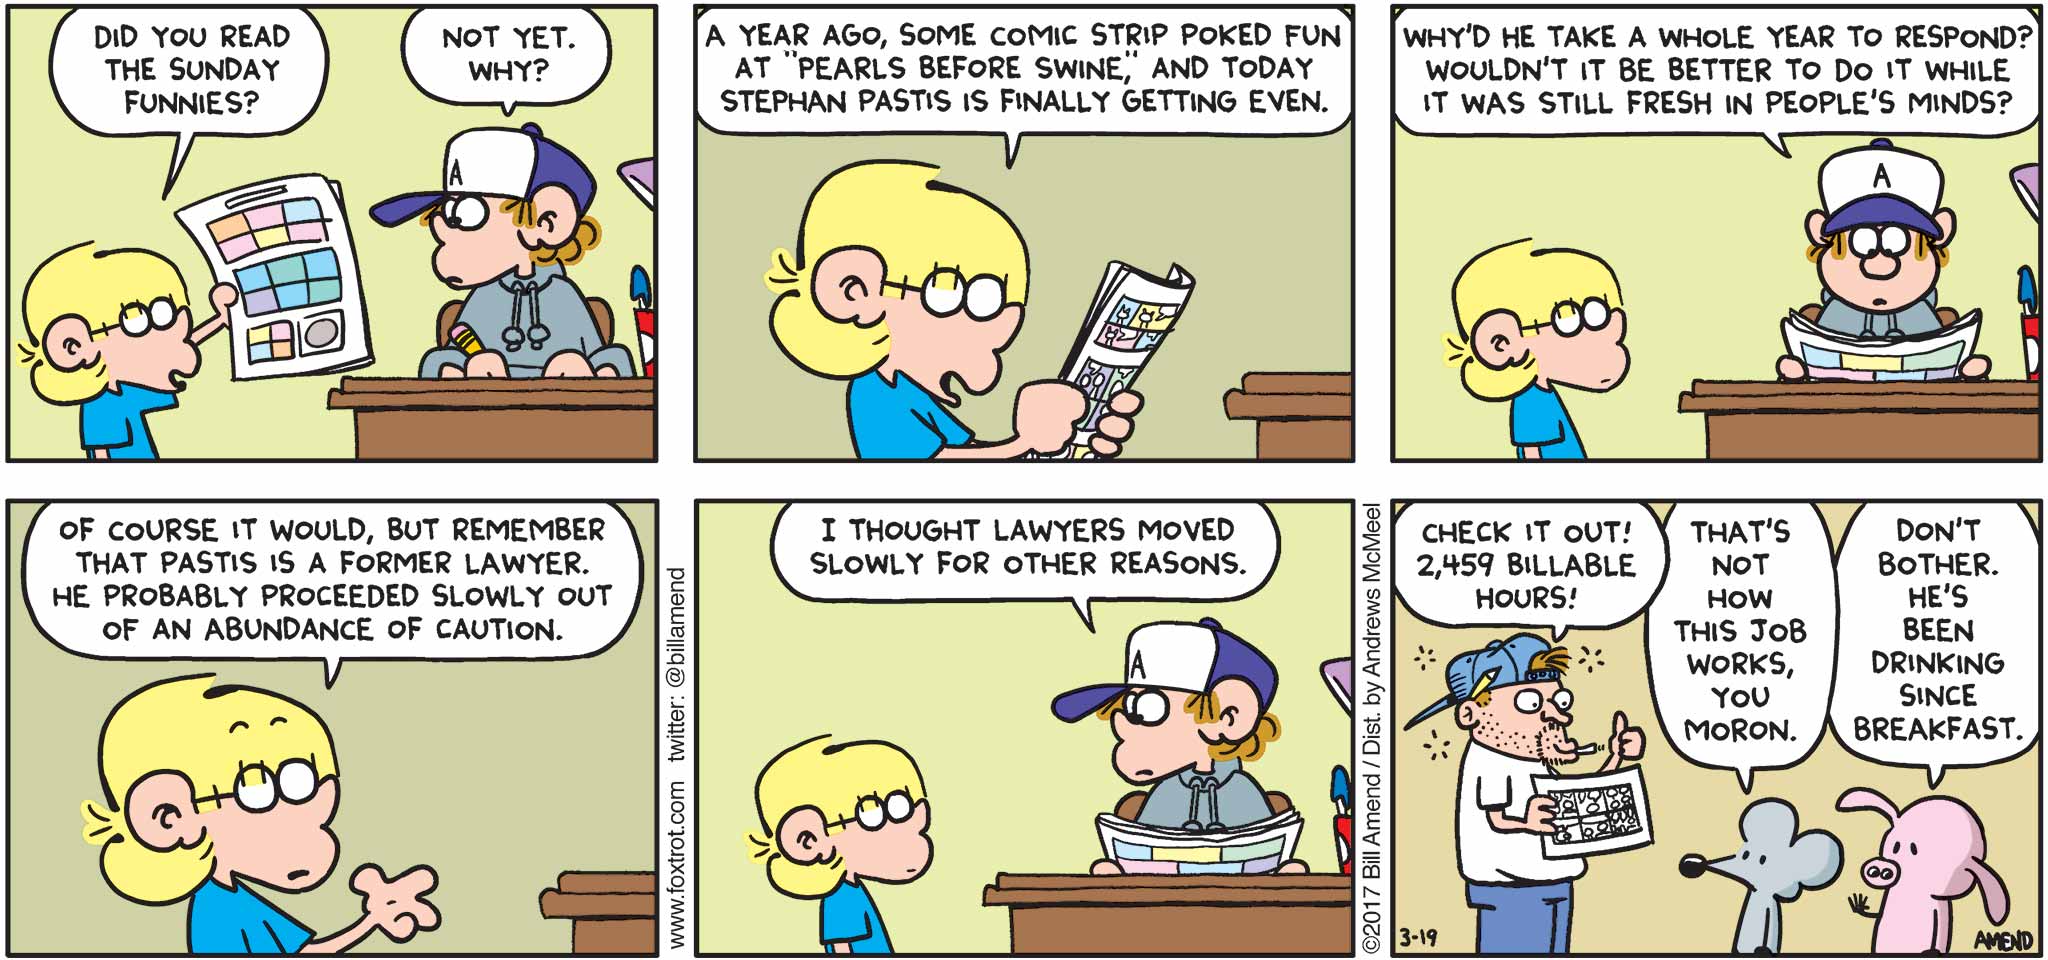 FoxTrot by Bill Amend - "Battle Lines Drawn" published March 19, 2017 - Jason says: Did you read the Sunday Funnies? Peter says: Not yet, why? Jason says: A year ago, some comic strip poked fun at "Pearls Before Swine," and today Stephan Pastis is finally getting even. Peter says: Why'd he take a whole year to respond? Wouldn't it be better to do it while it was still fresh in people's minds? Jason says: Of course it would, but remember that Pastis is a former lawyer. He probably proceeded slowly out of an abundance of caution. Peter says: I thought lawyers moved slowly for other reasons. Stephan Pastis says: Check it out! 2,459 billable hours! Rat says: That's not how this job works, you moron. Pig says: Don't bother. He's been drinking since breakfast.